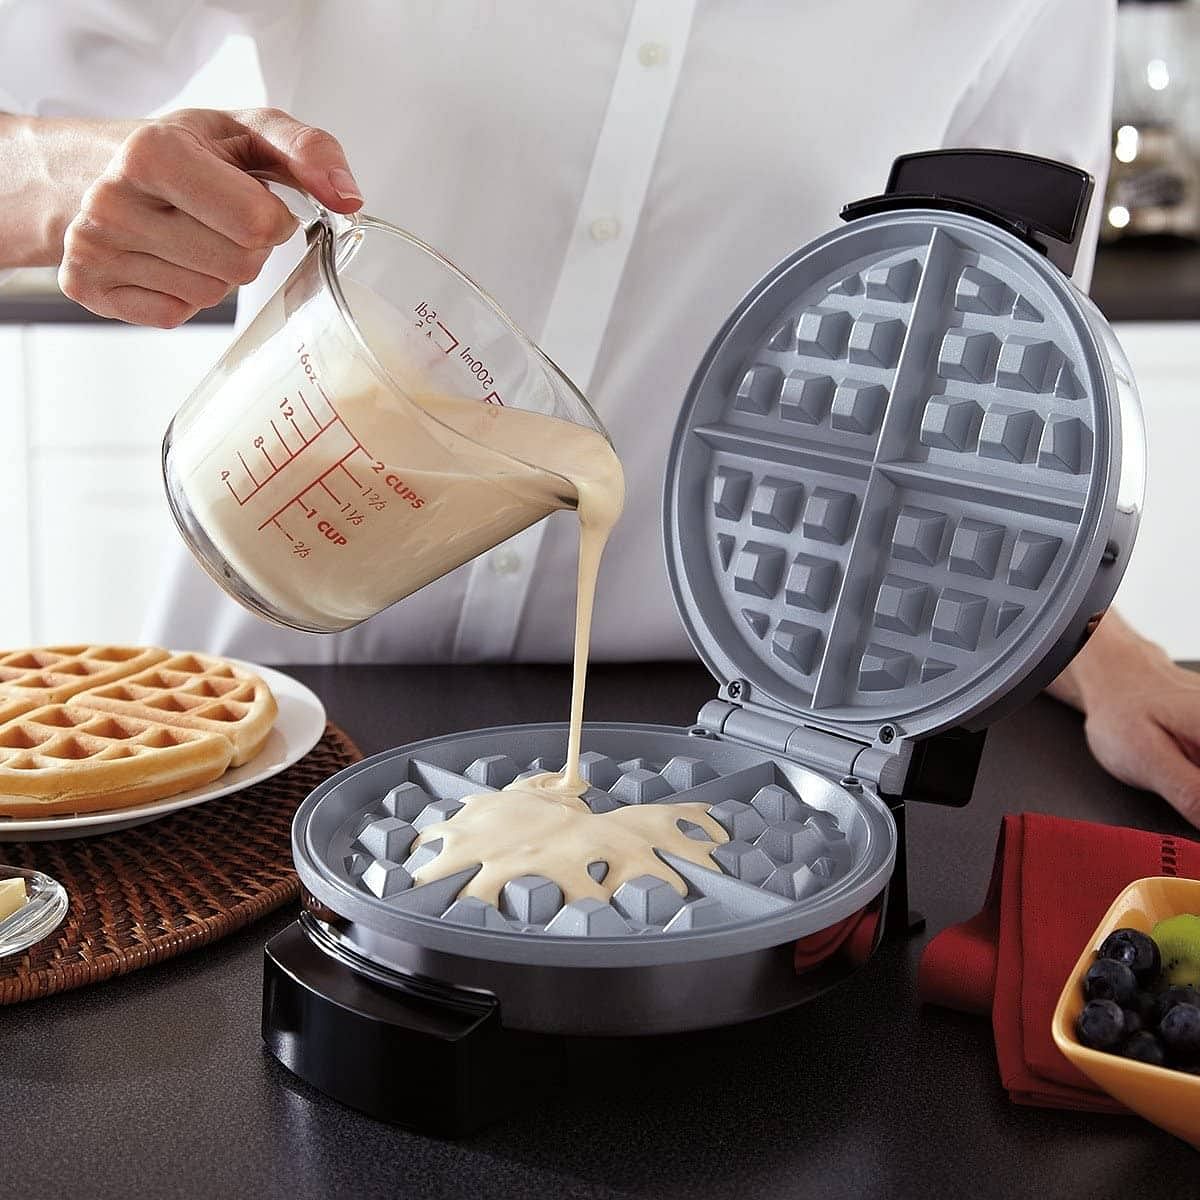 VCJ 8 inches Waffle Maker Indicator Light Non-stick coated Plates Adjustable Temperature Control 1000W Mini Round Waffle Iron with Anti-overflow Design 